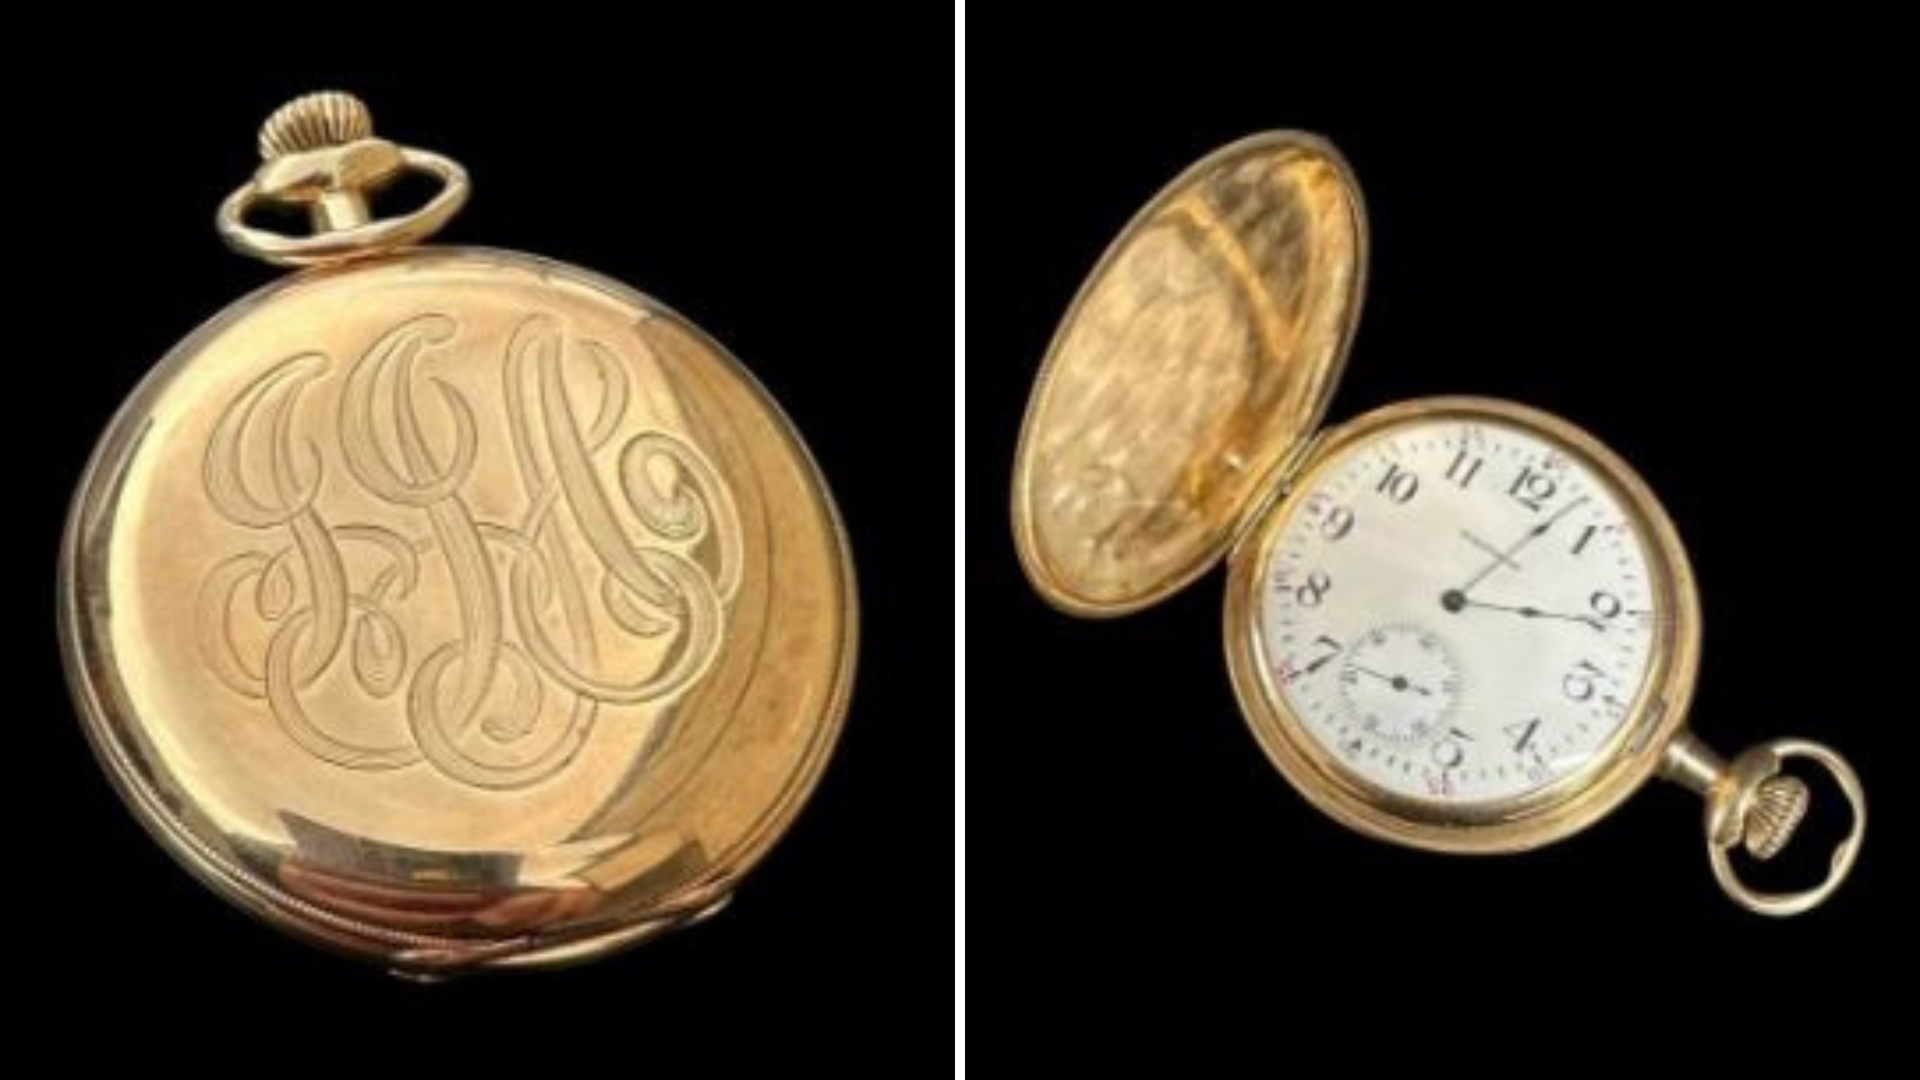 Gold watch of richest Titanic passenger sells for $1.46 million